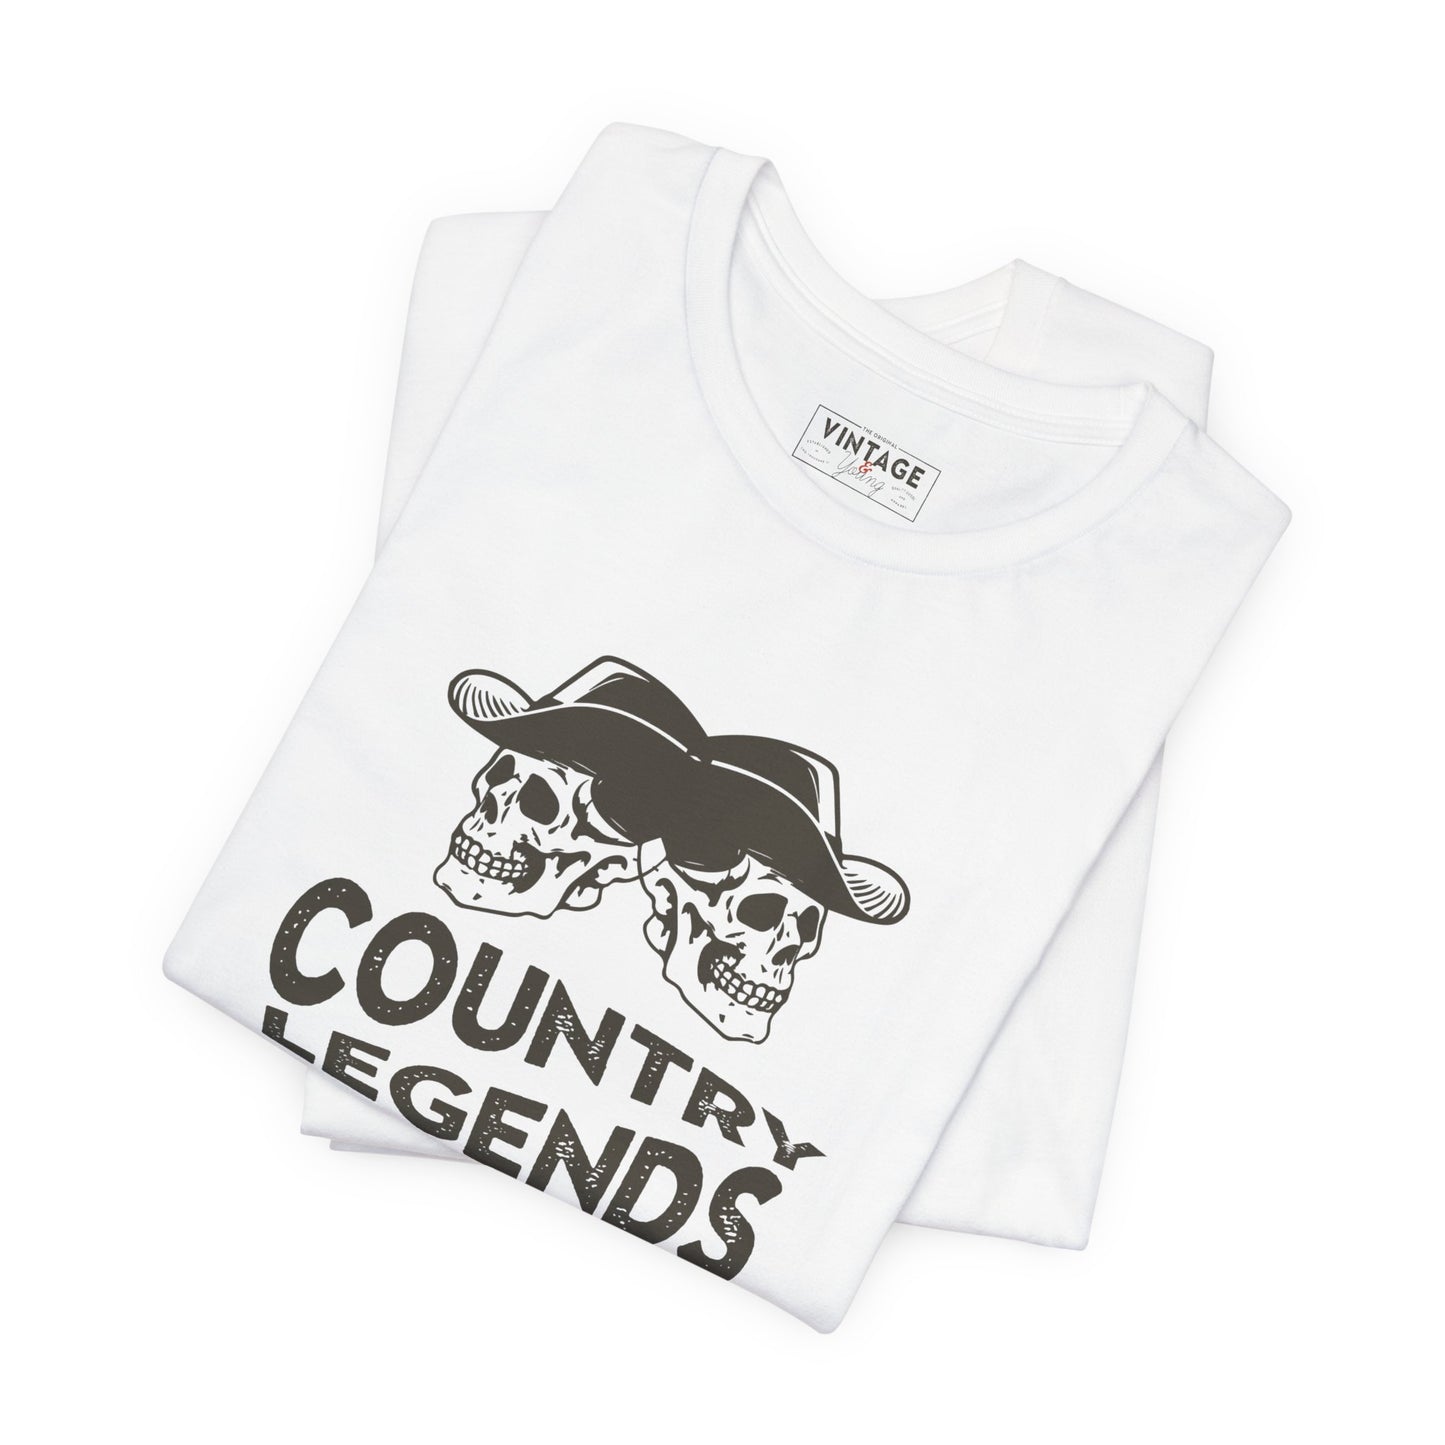 Country Legends Tee